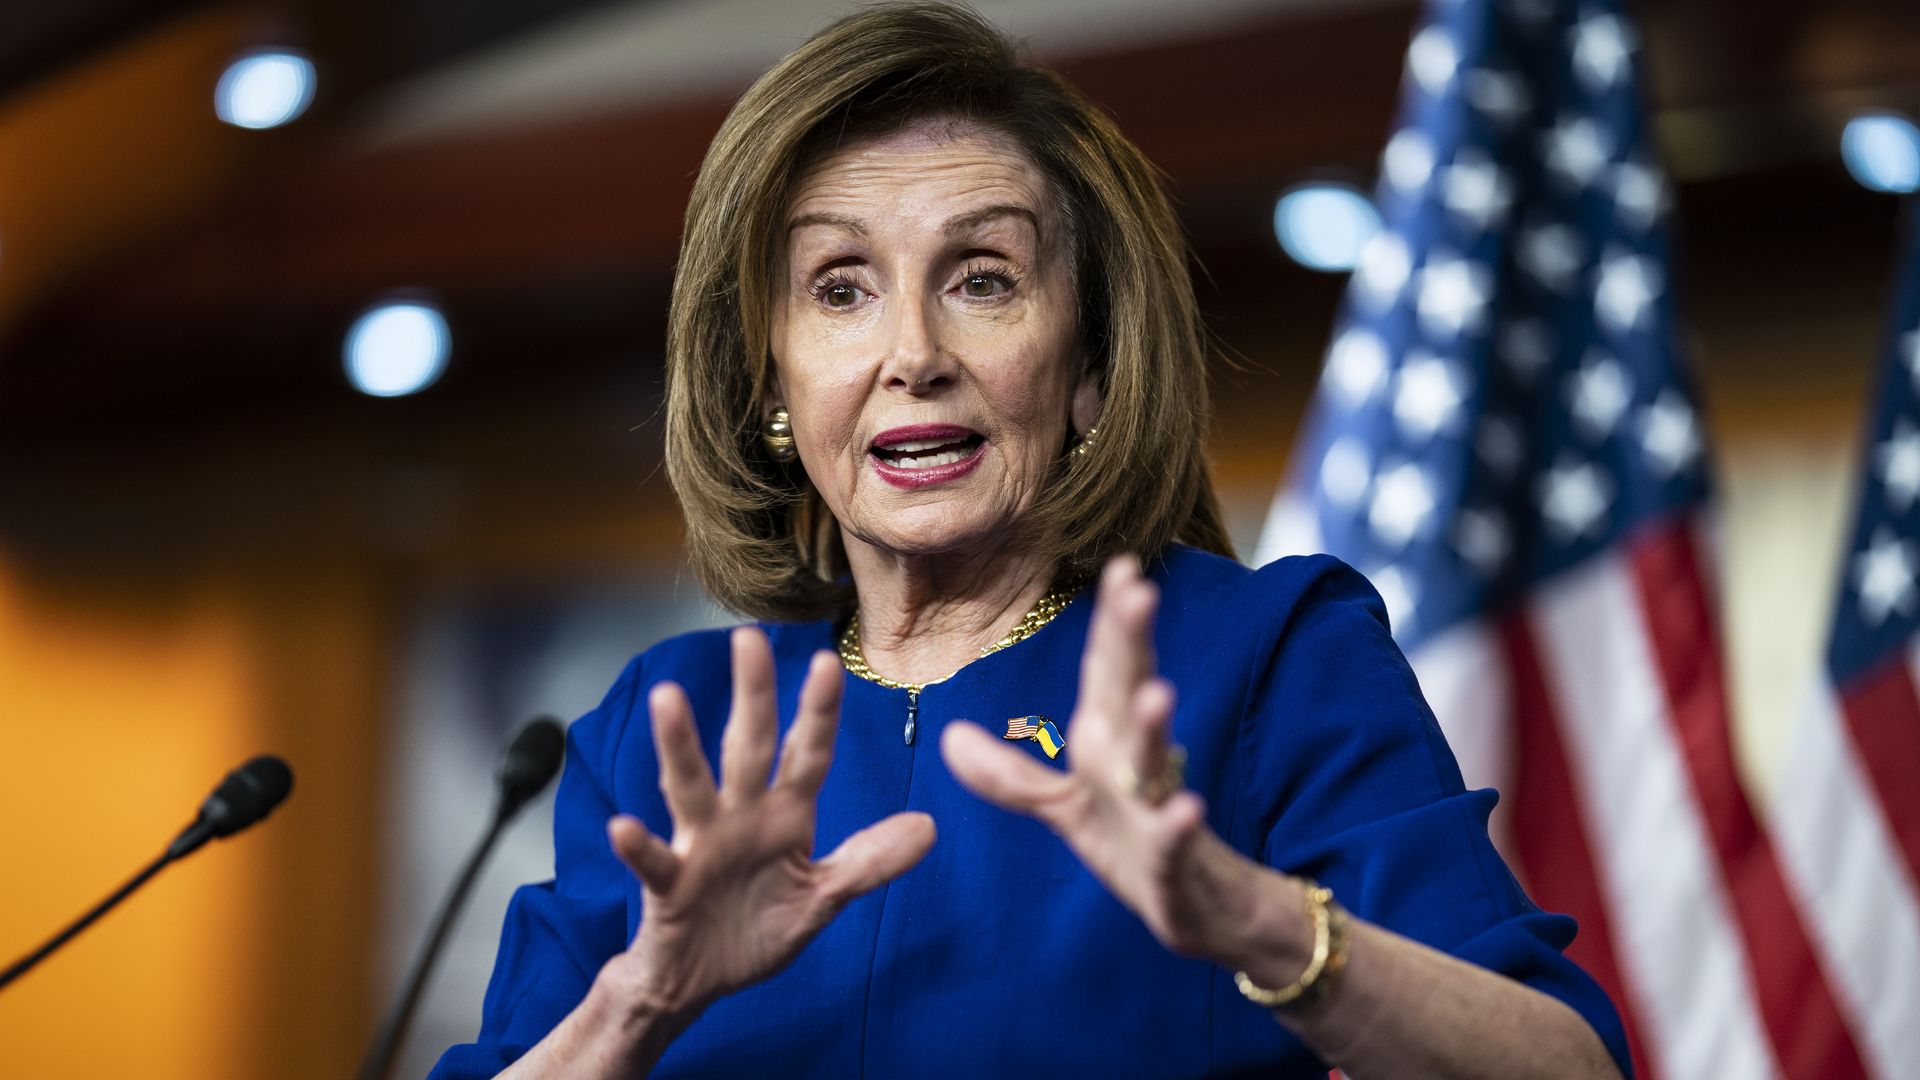 House Speaker Nancy Pelosi is seen gesturing with her hands during a news conference.